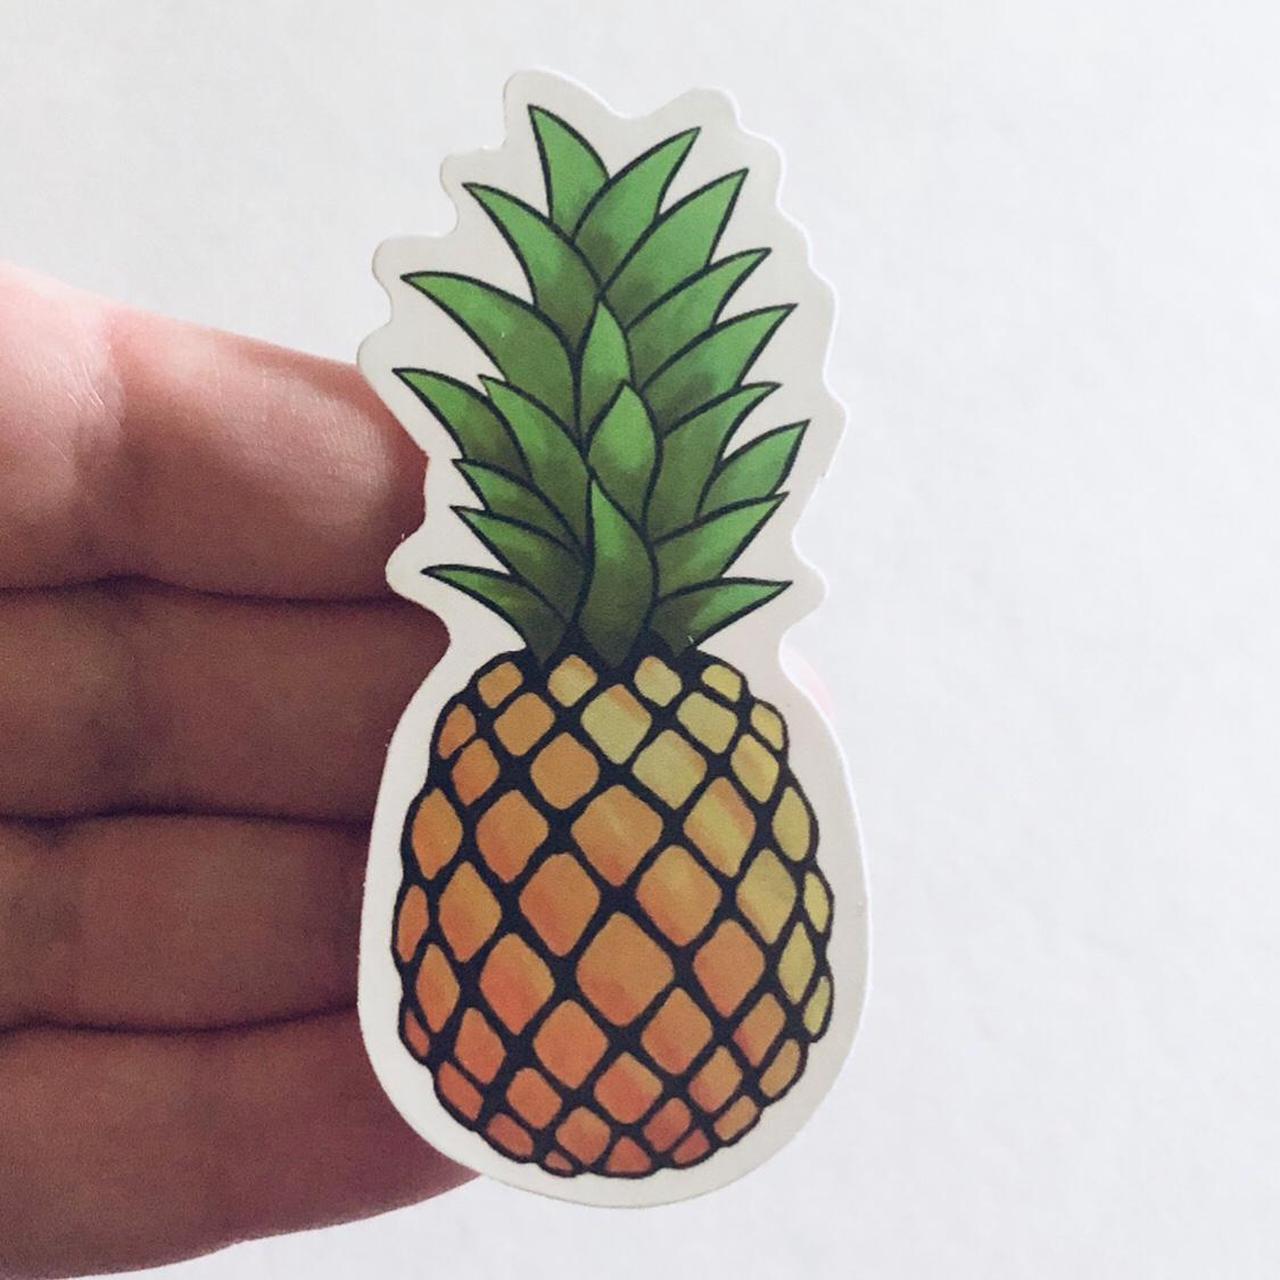 Product Image 1 - Fruit pineapple sticker, stationery stickers